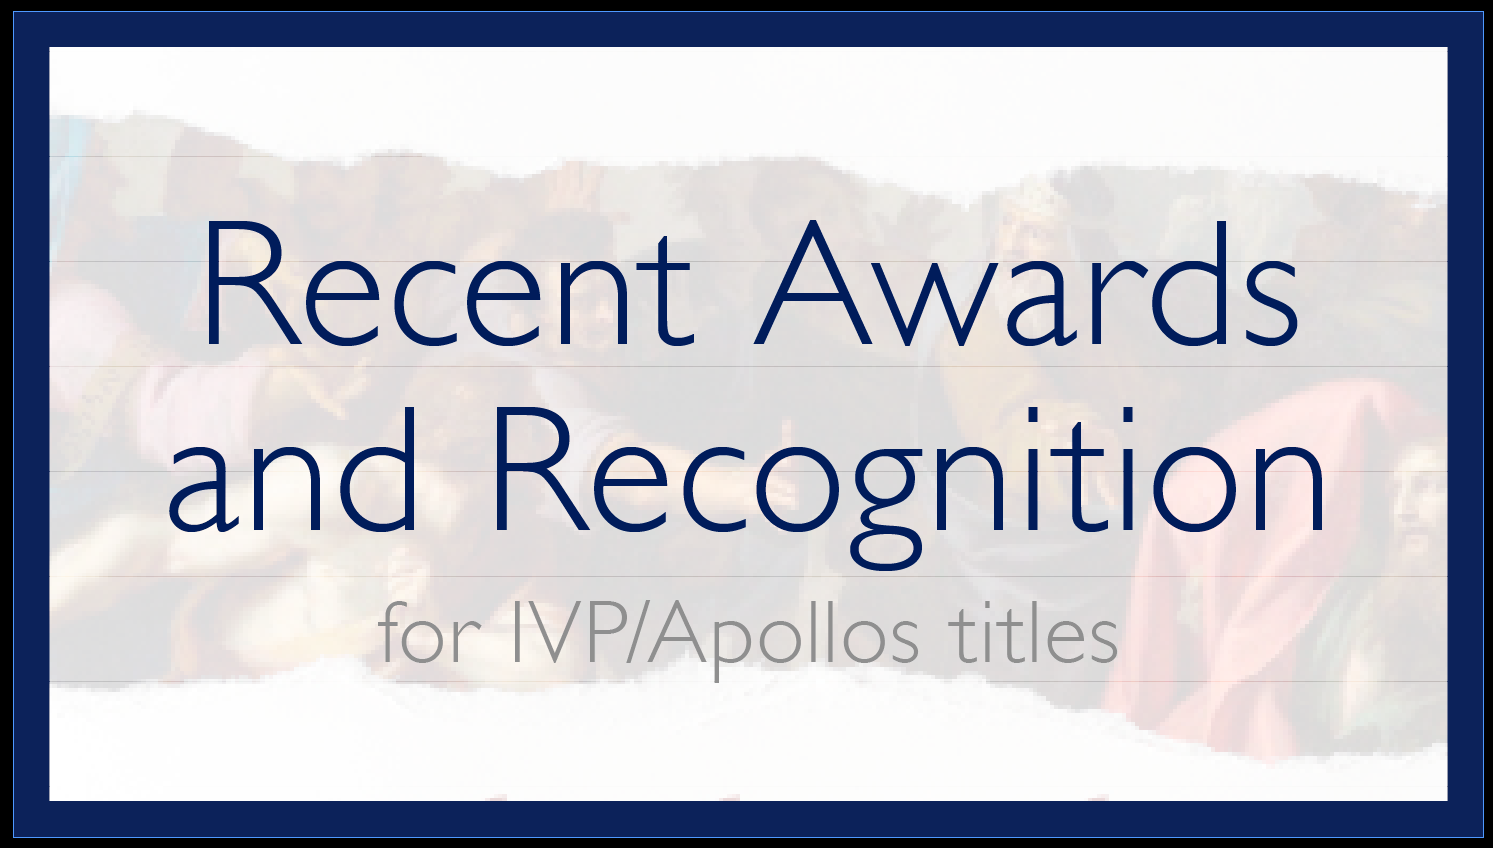 Recent Awards and Recognition for IVP/Apollos titles